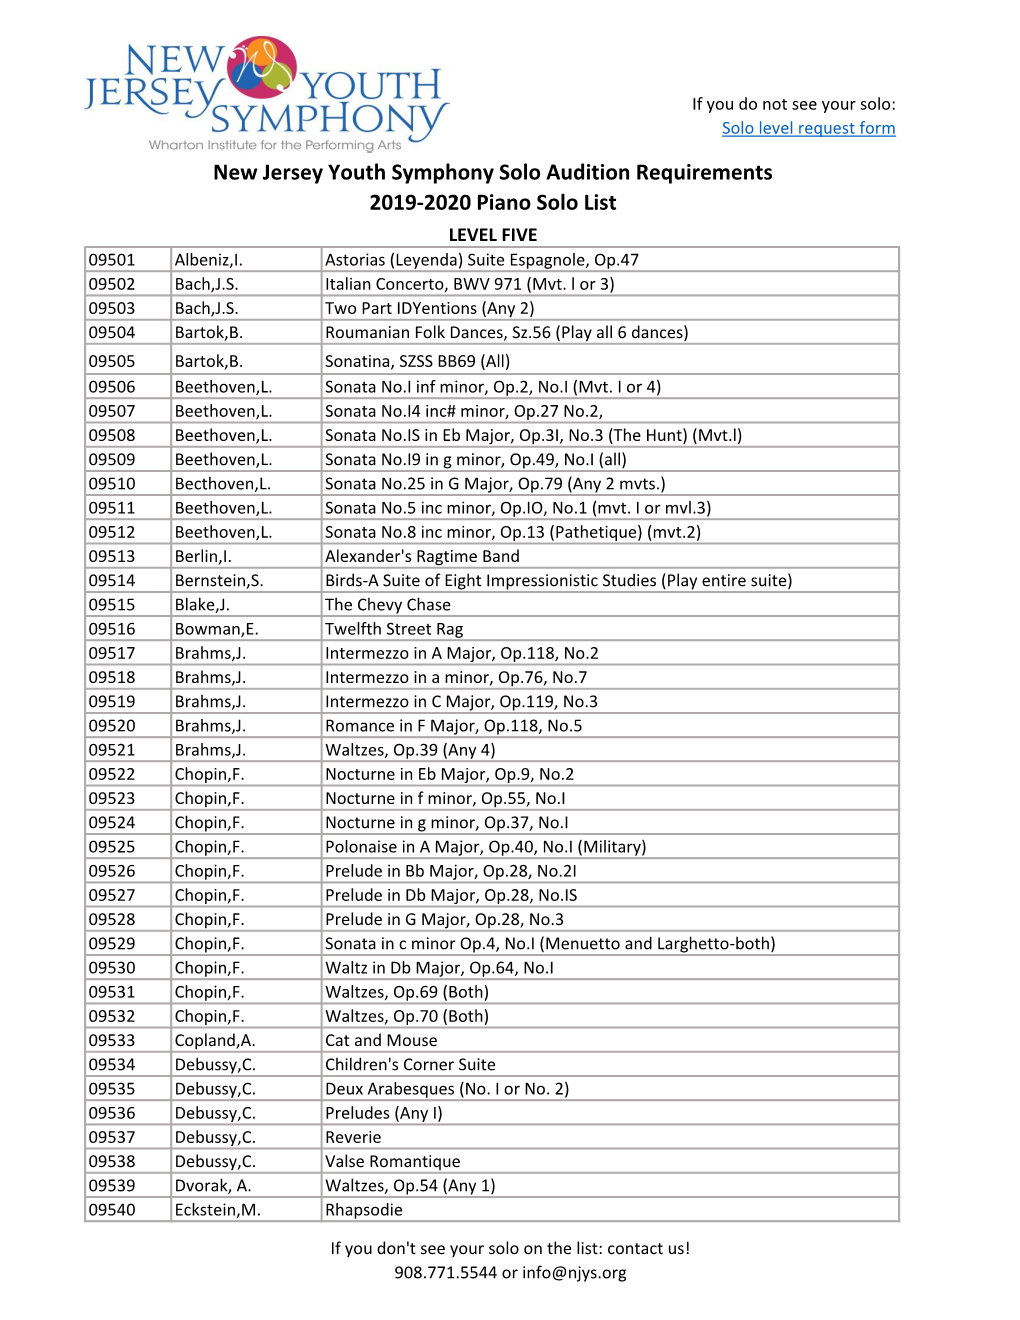 New Jersey Youth Symphony Solo Audition Requirements 2019-2020 Piano Solo List LEVEL FIVE 09501 Albeniz,I